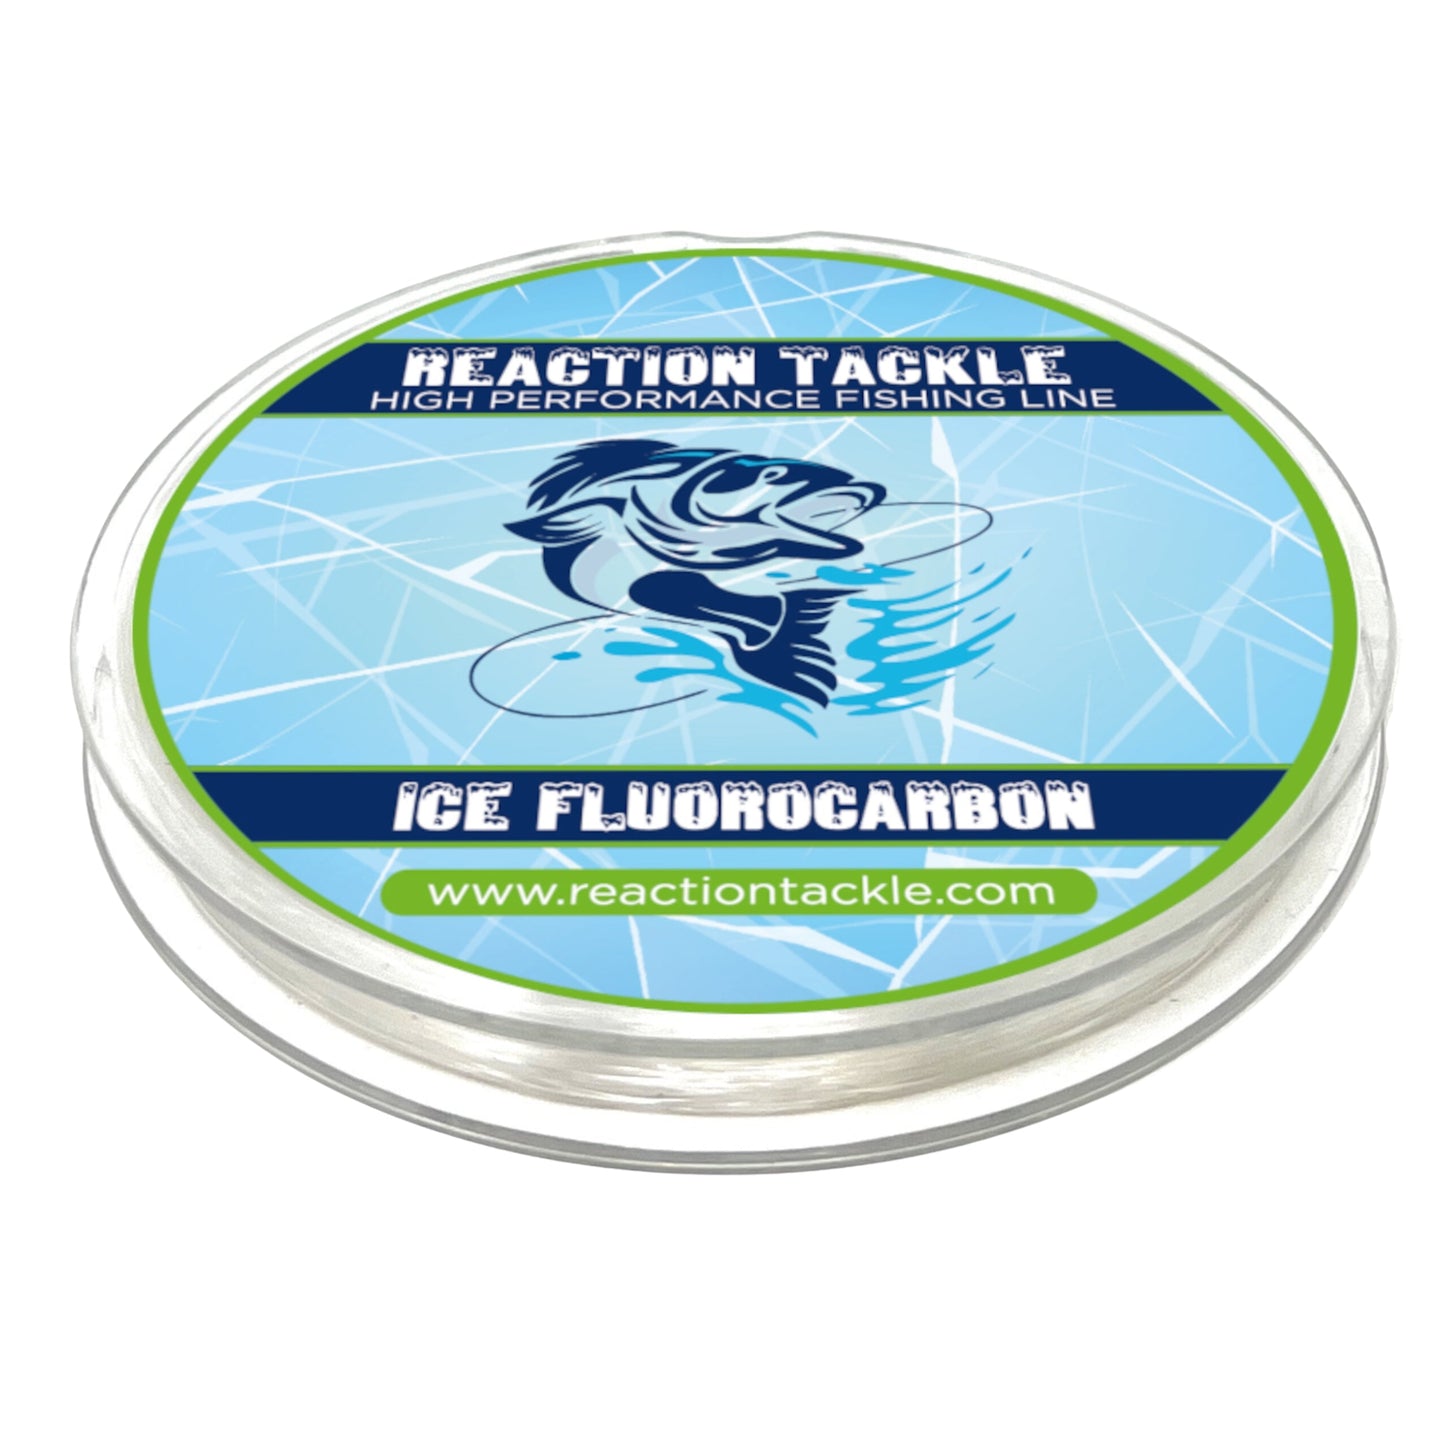 Reaction Tackle Ice Fluorocarbon Fishing Line or Leader